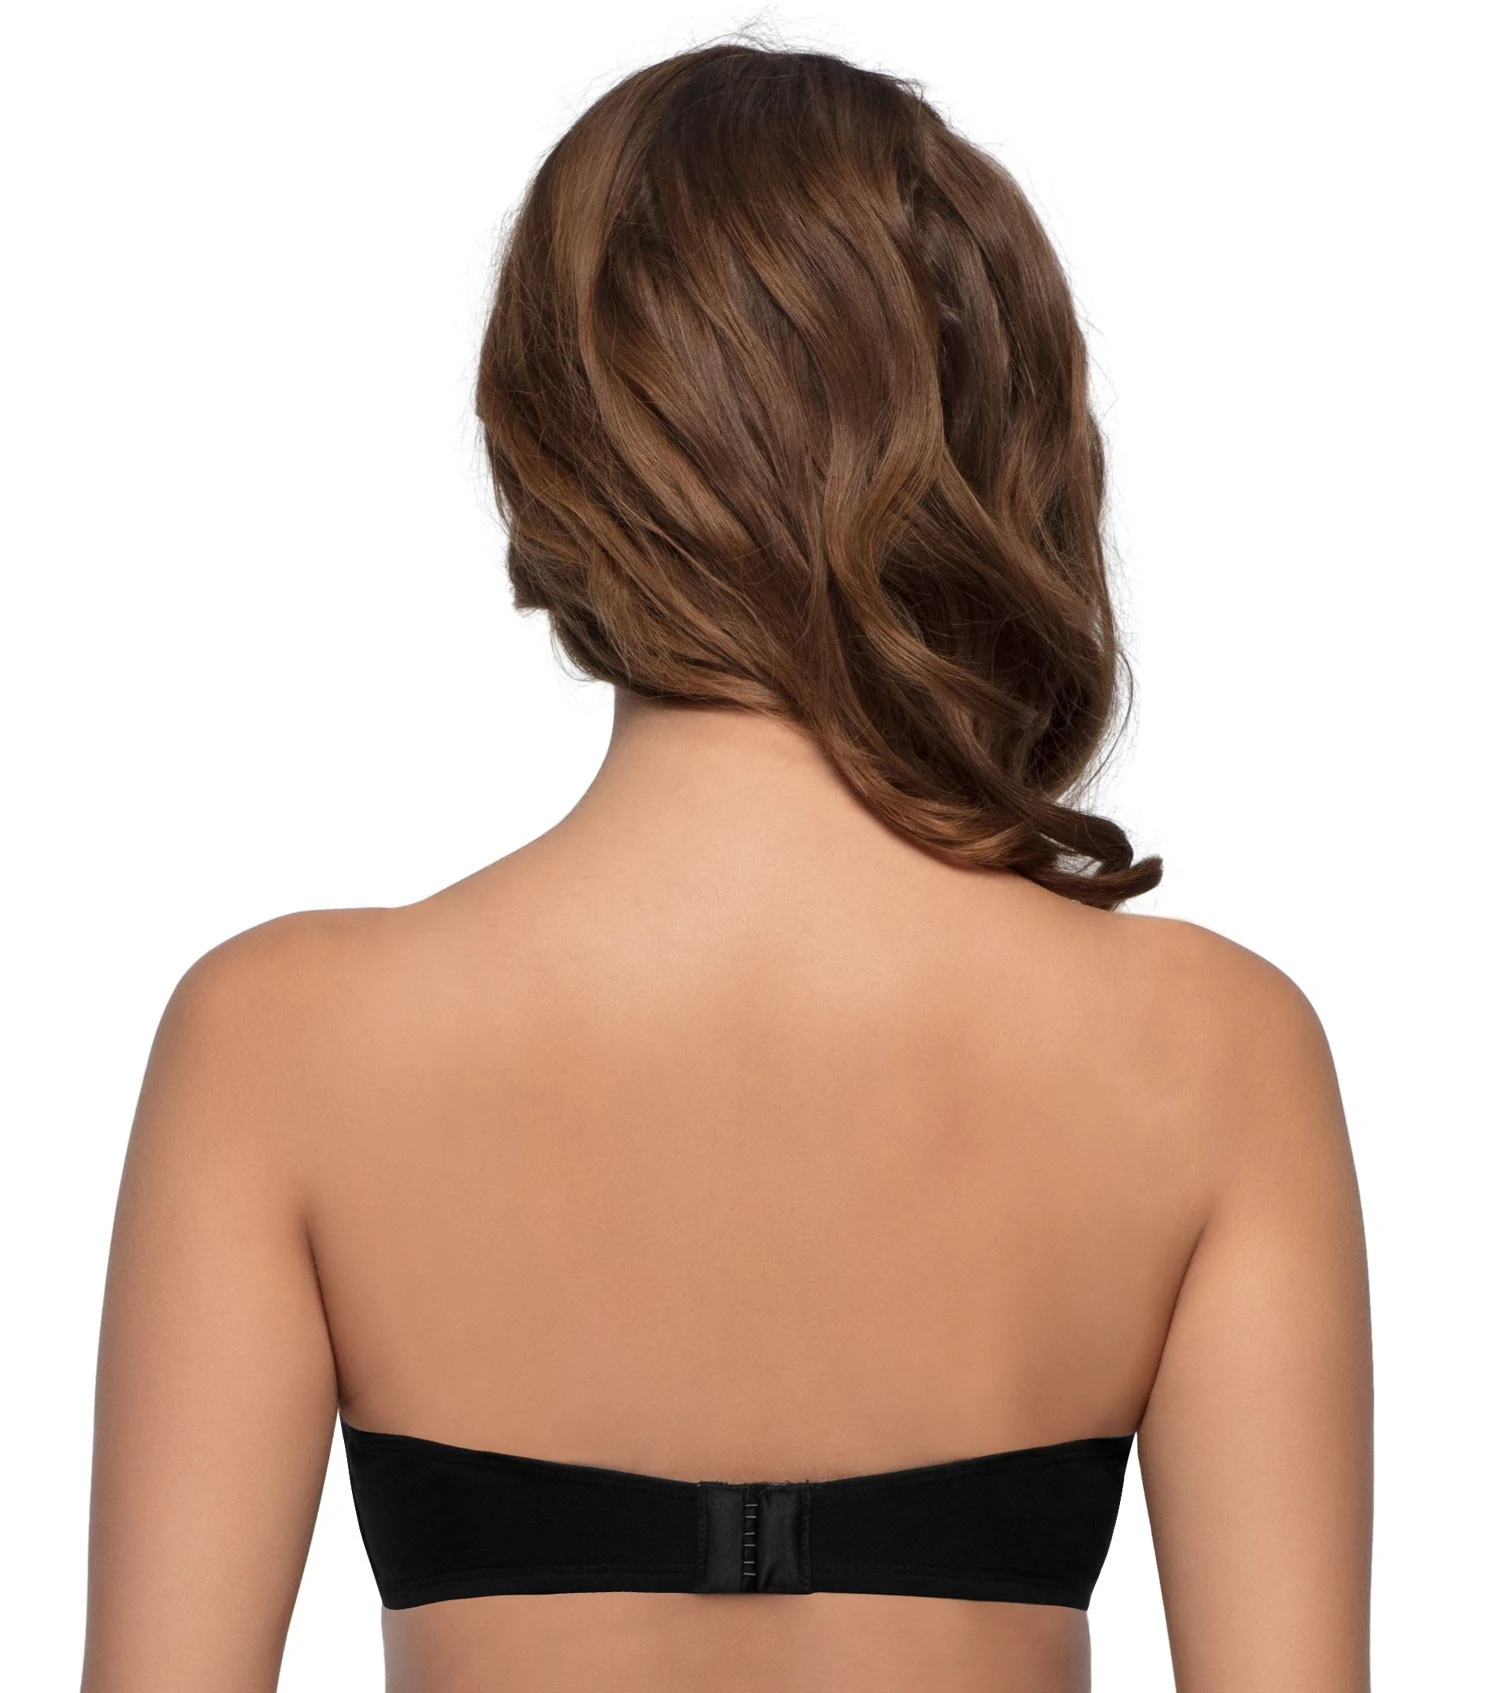 Enamor Black Color Perfect Shaping Wirefree Cotton Strapless Bra-A019BLK